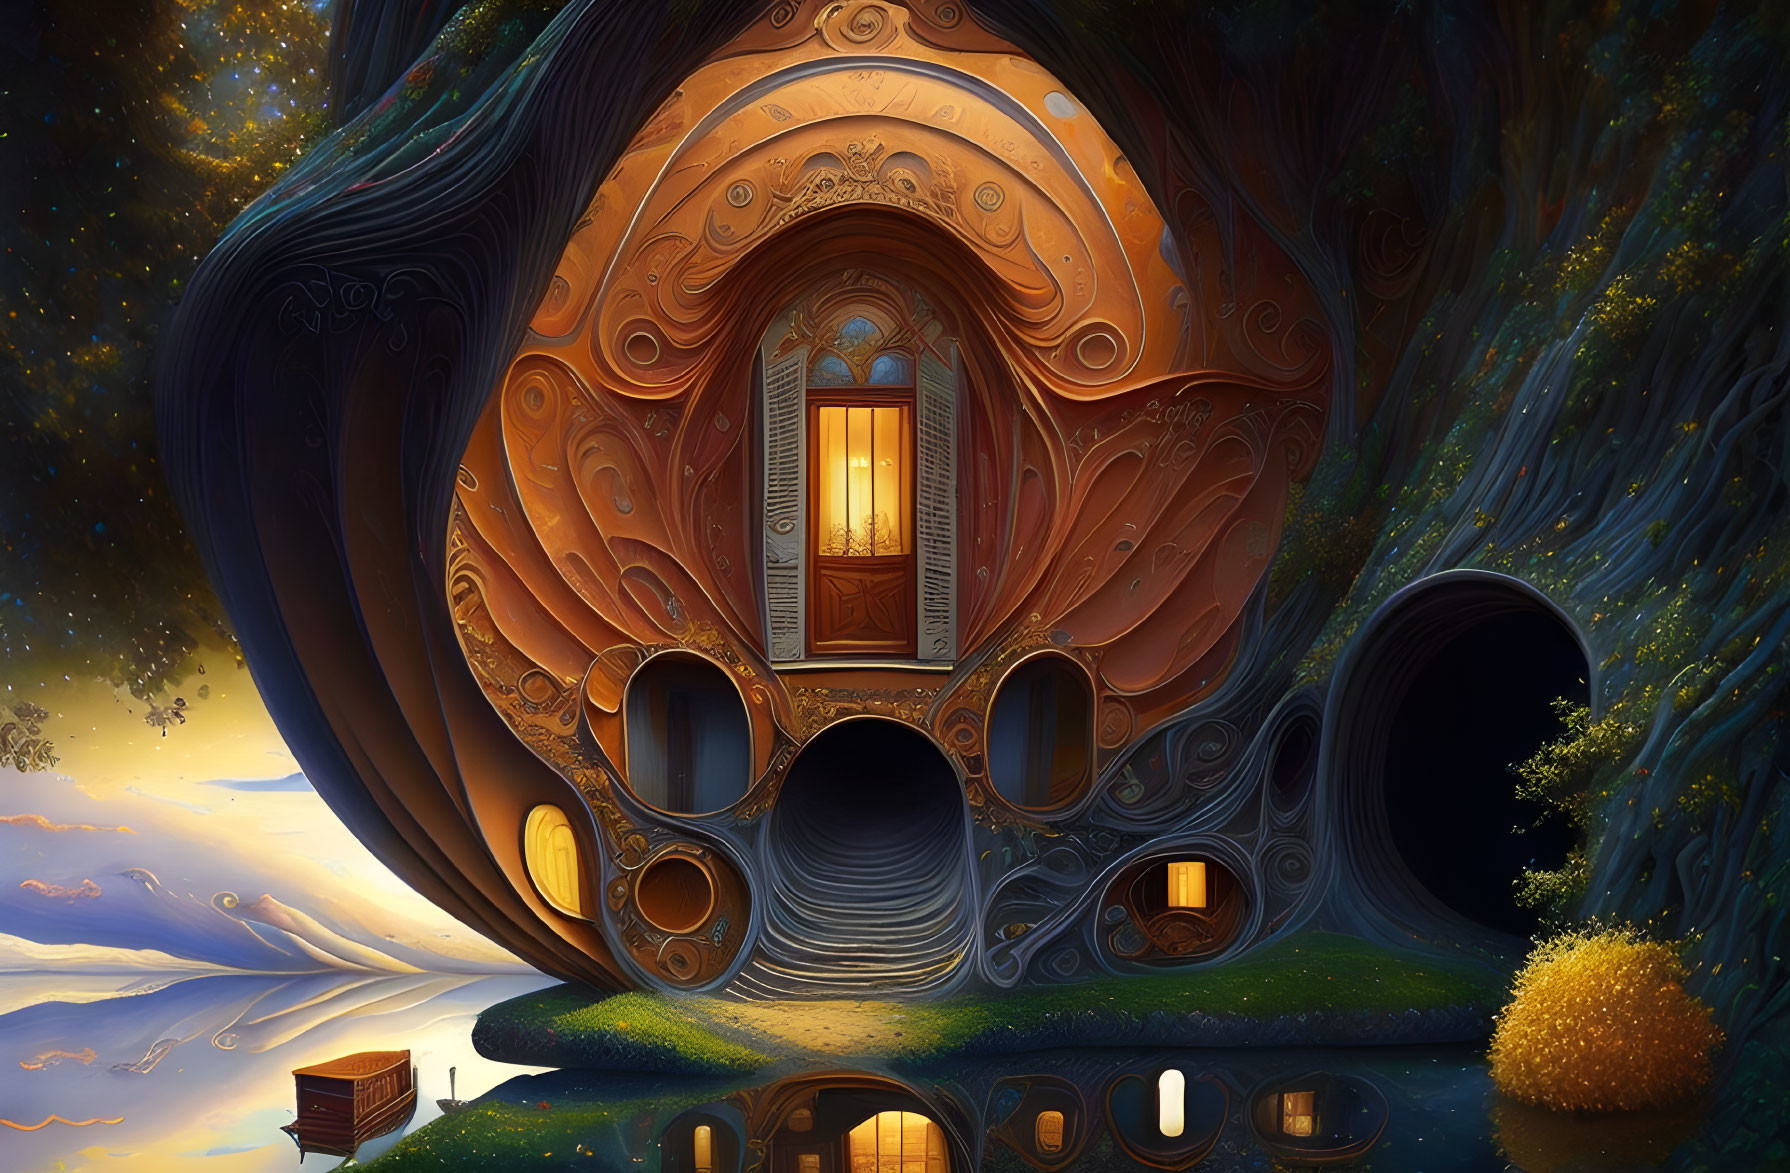 Fantastical treehouse illustration with swirling designs against starry sky